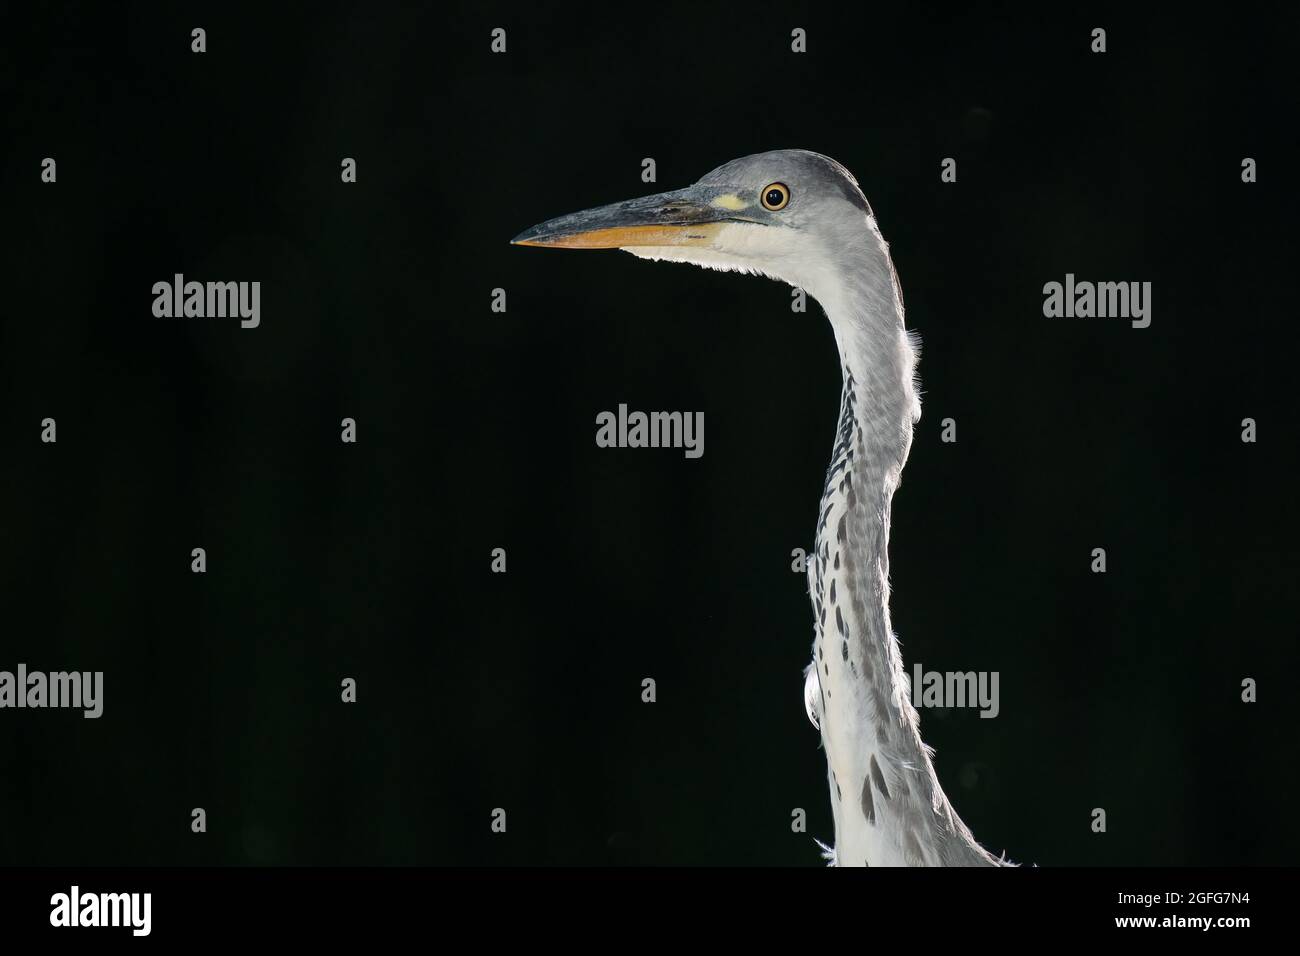 Close up of a grey heron at night. The image shows the next and head only and is set against an almost black background Stock Photo